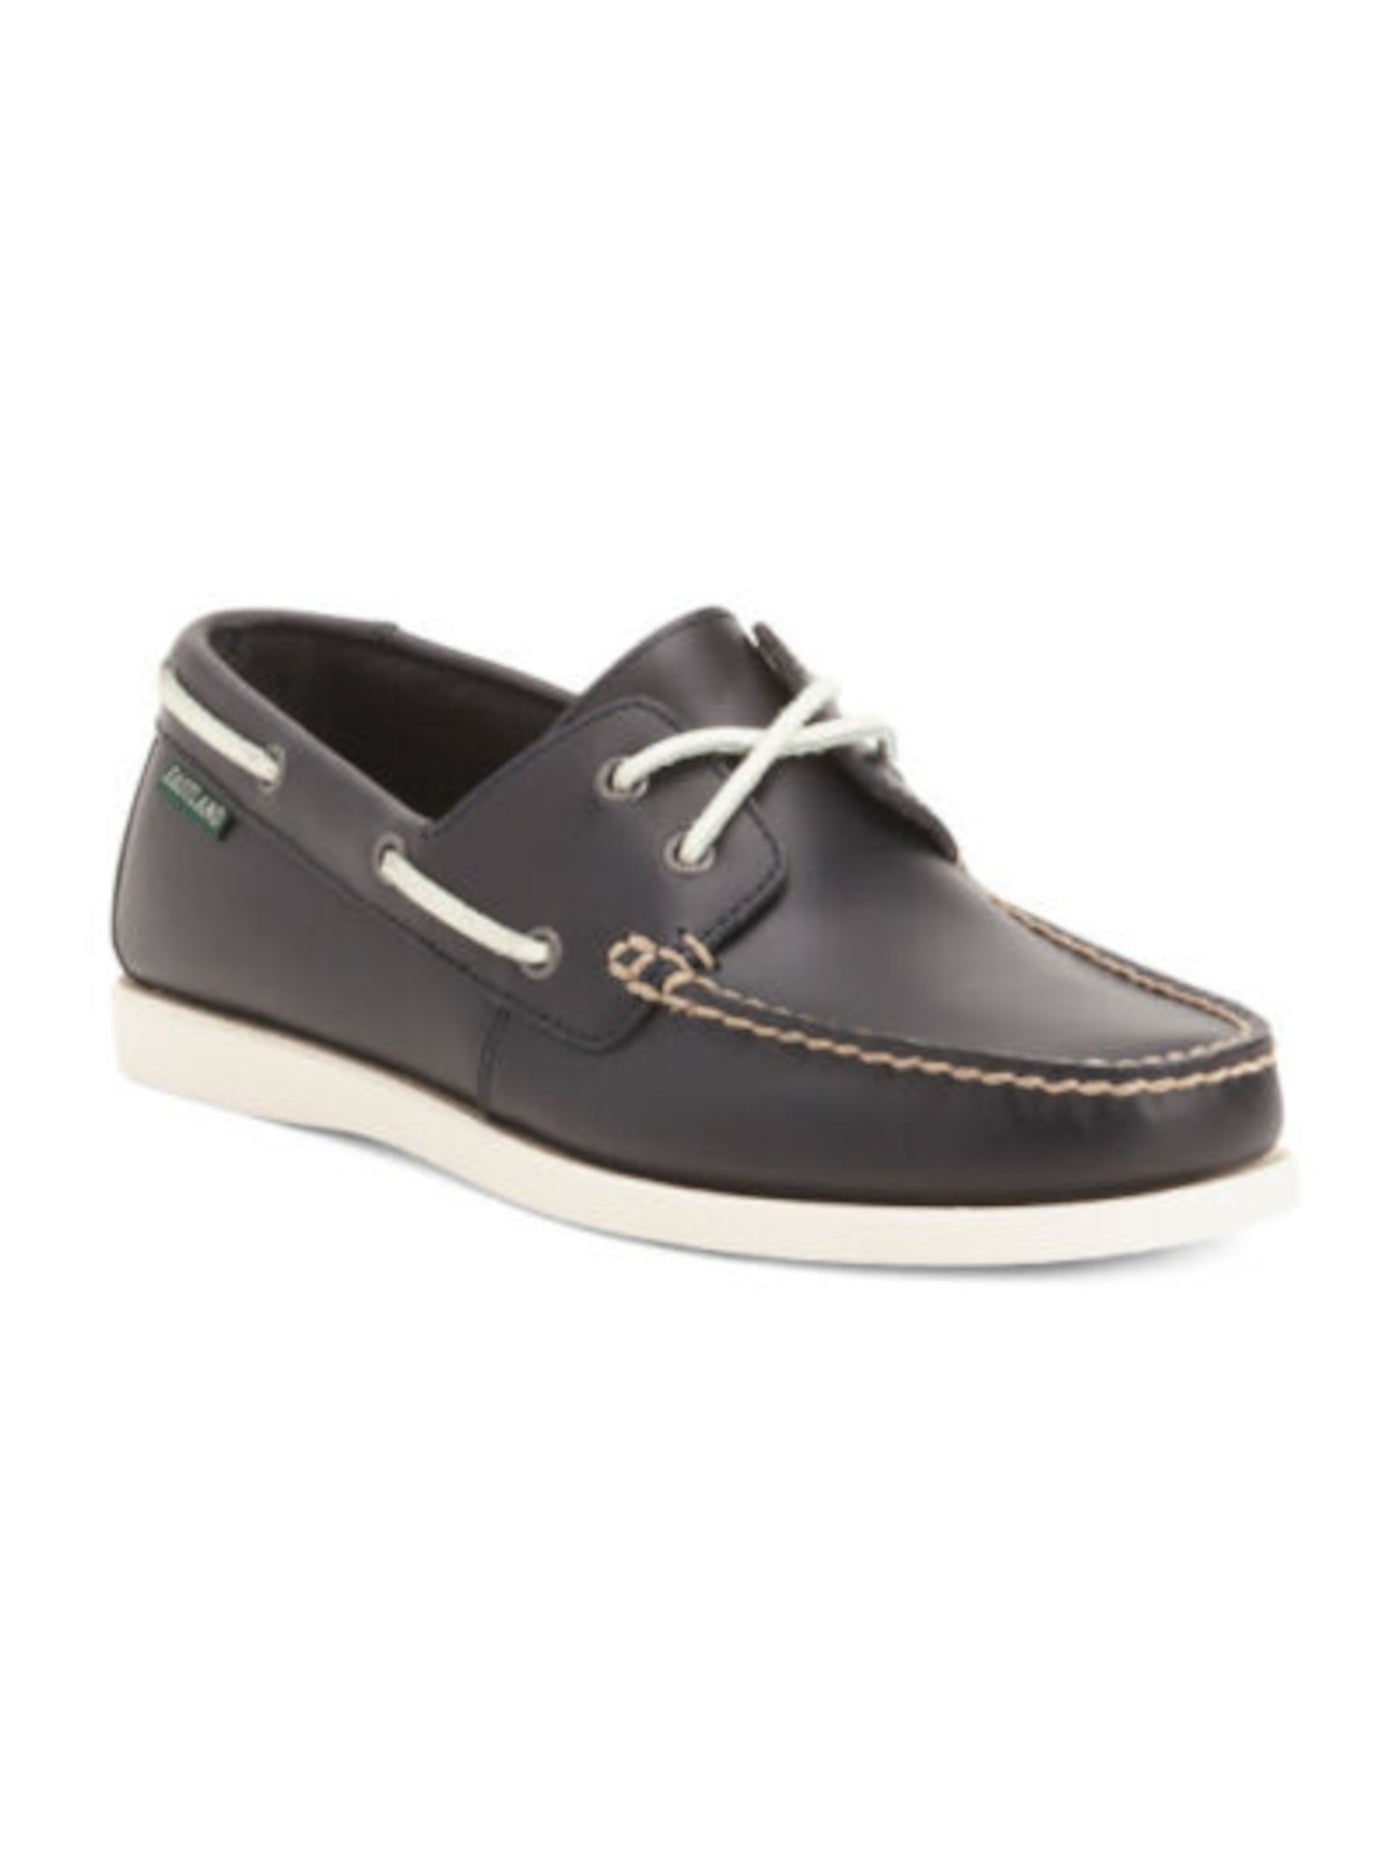 EASTLAND Mens Navy Seaport Round Toe Slip On Leather Boat Shoes 12 D